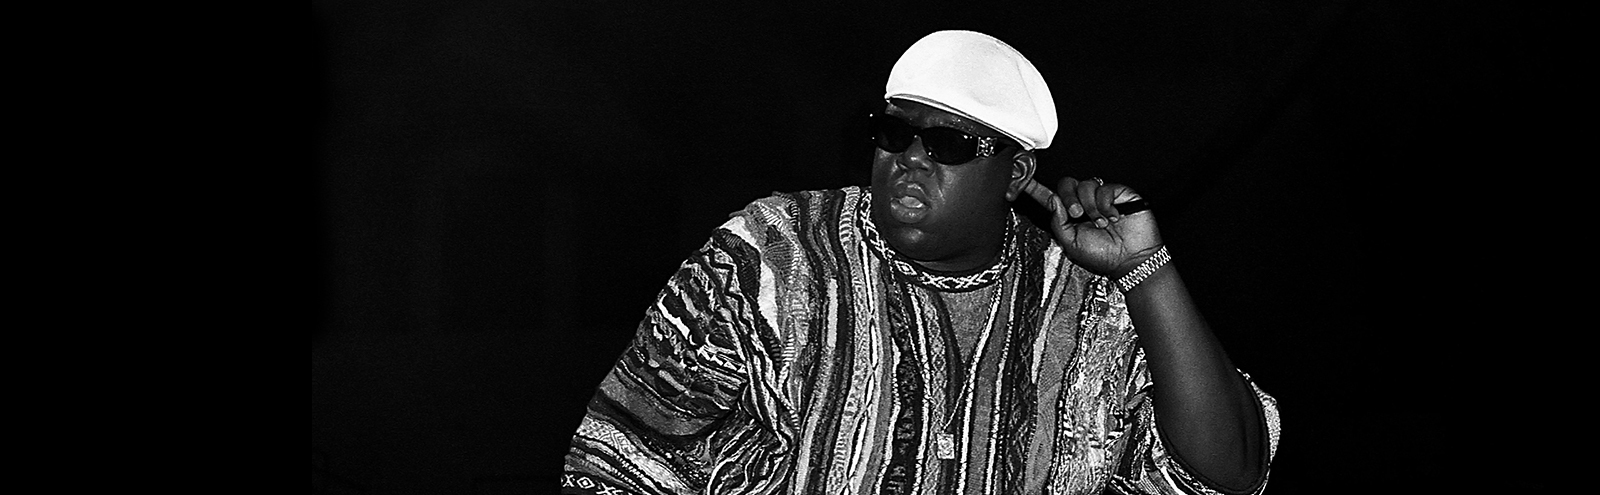 ‘Biggie: I Got A Story To Tell’ Shows How The Notorious B.I.G. Epitomized Hip-Hop